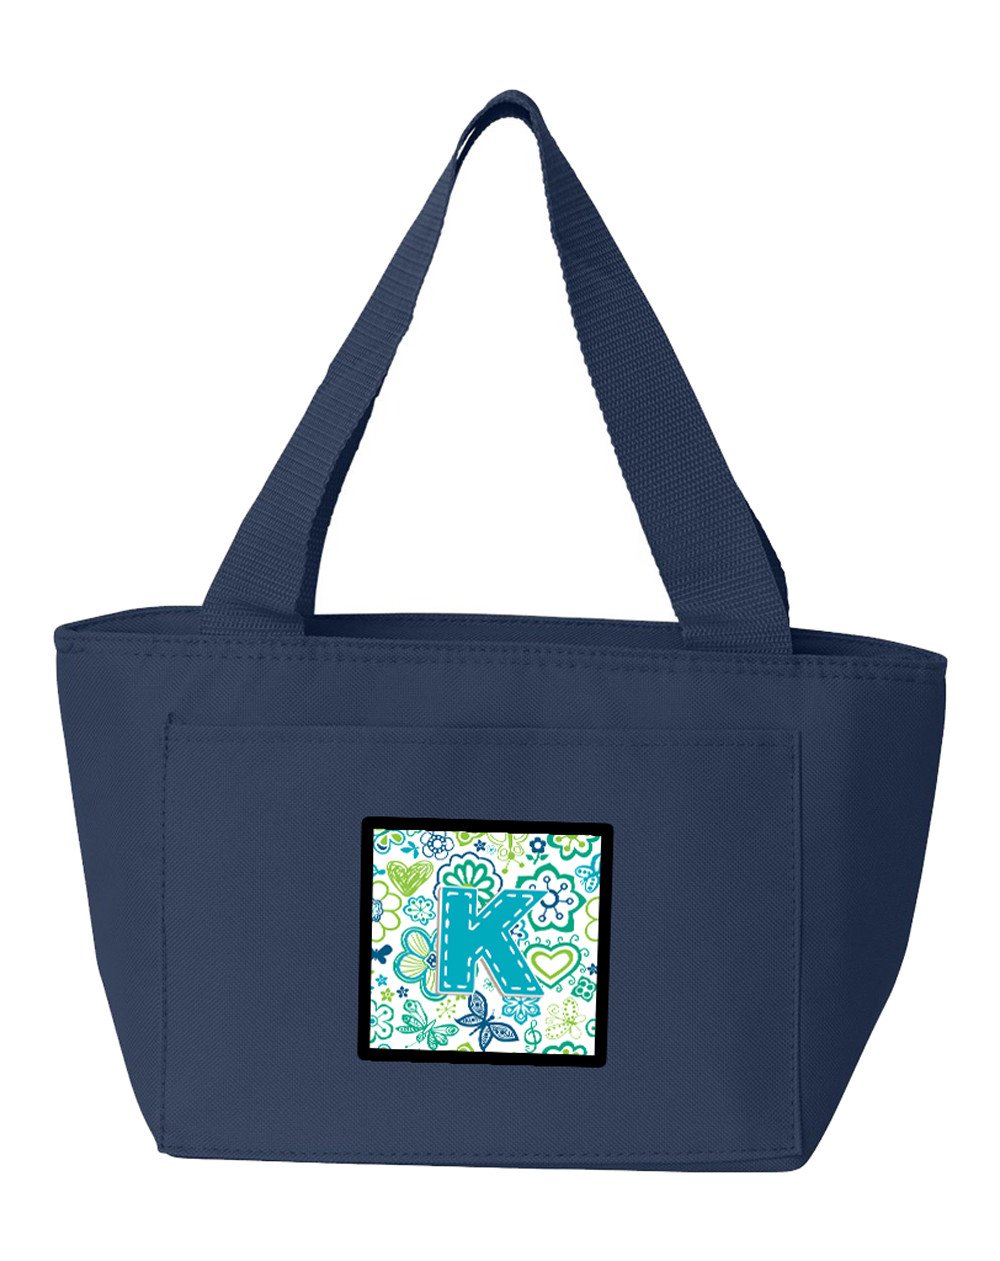 Letter K Flowers and Butterflies Teal Blue Lunch Bag CJ2006-KNA-8808 by Caroline's Treasures